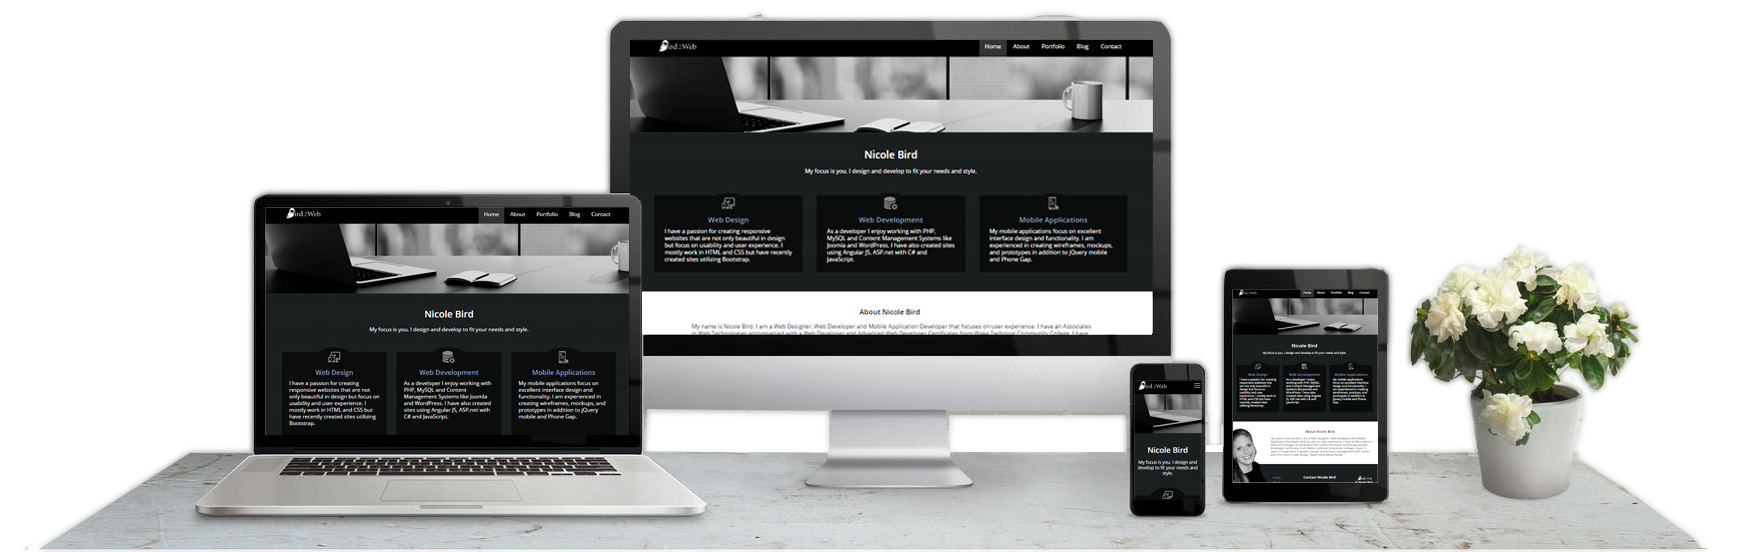 Website with mobile resposive design on mobile phone, tablet and desktop computer